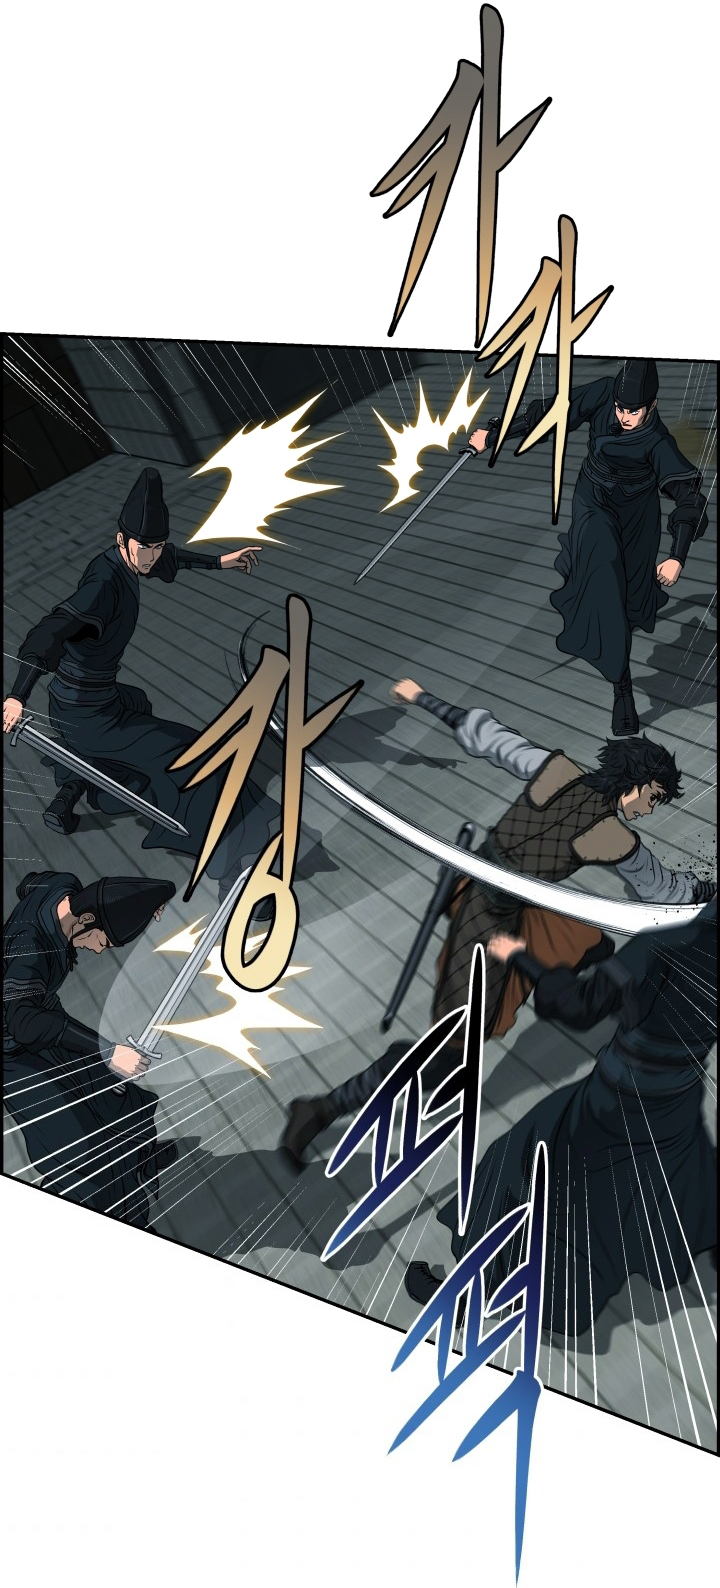 Blade of Wind and Thunder 25 (20)